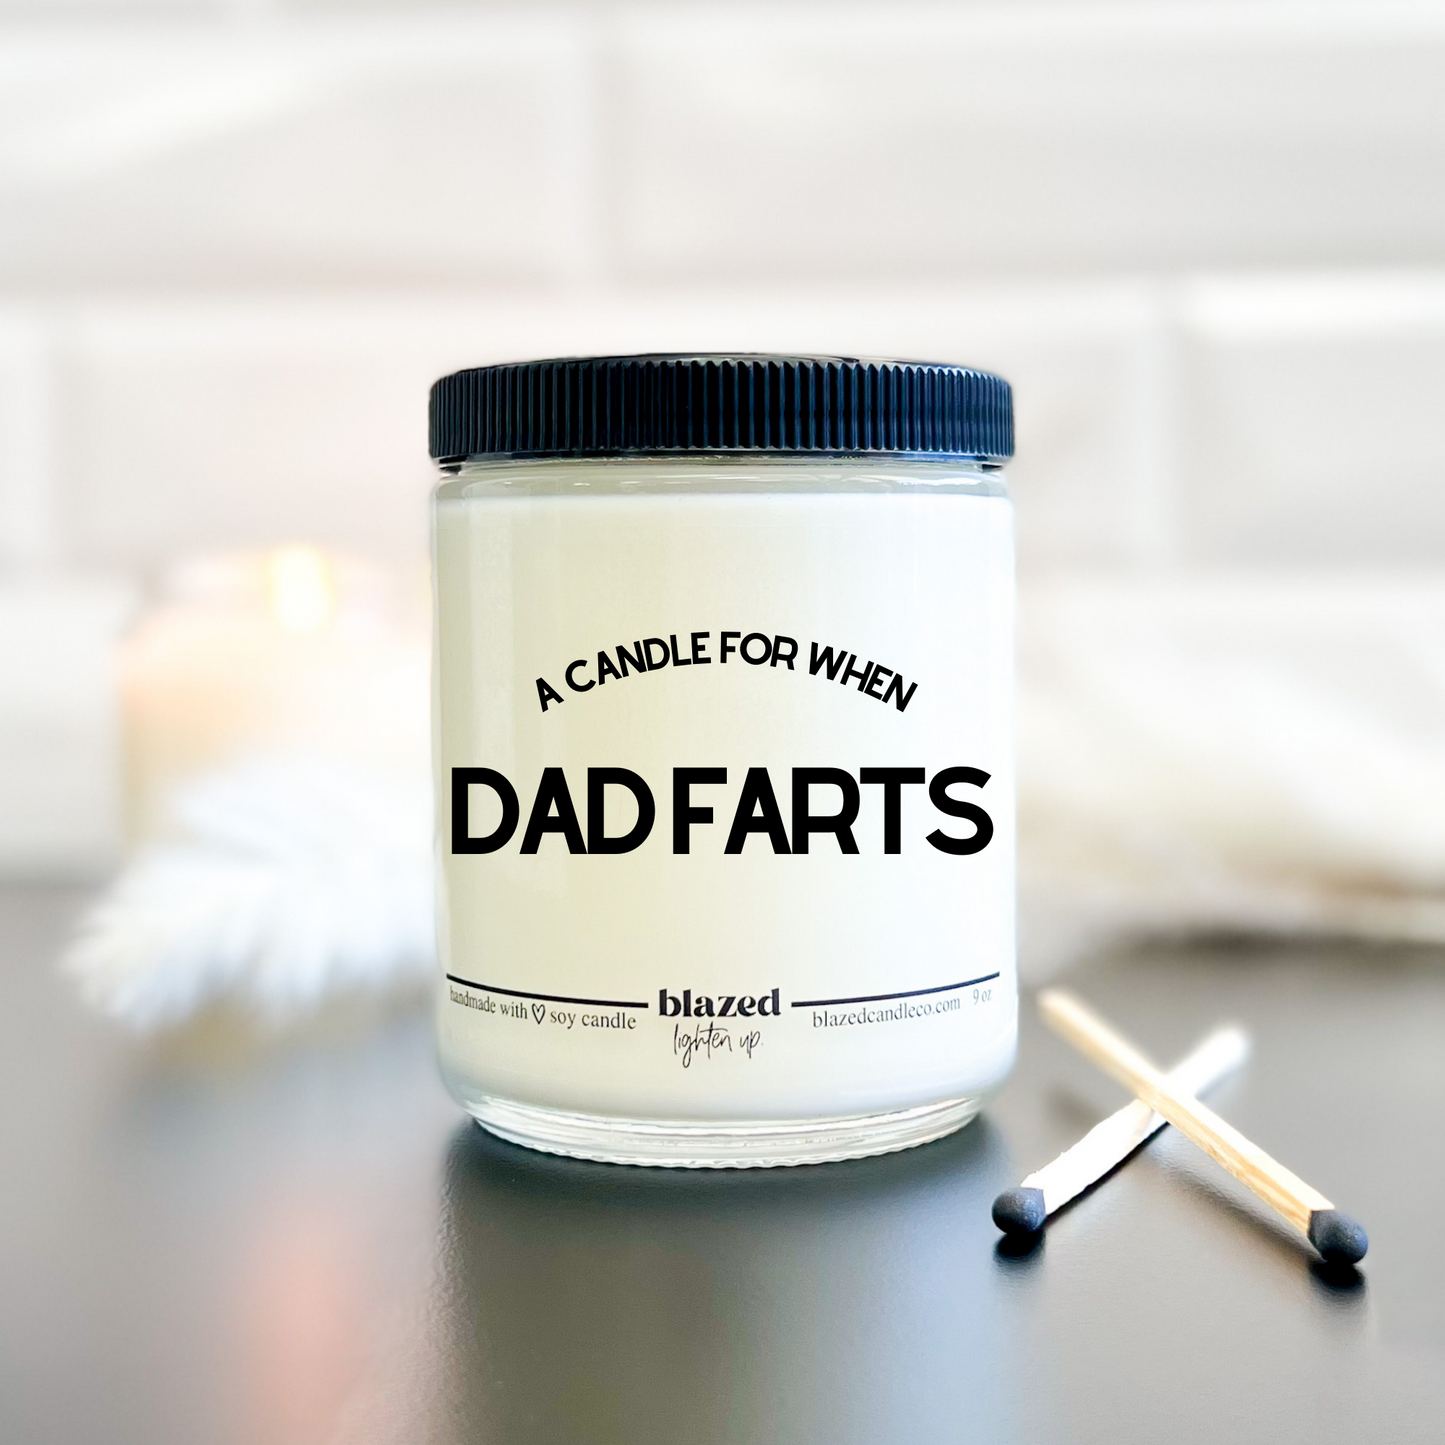 A Candle For When Dad Farts